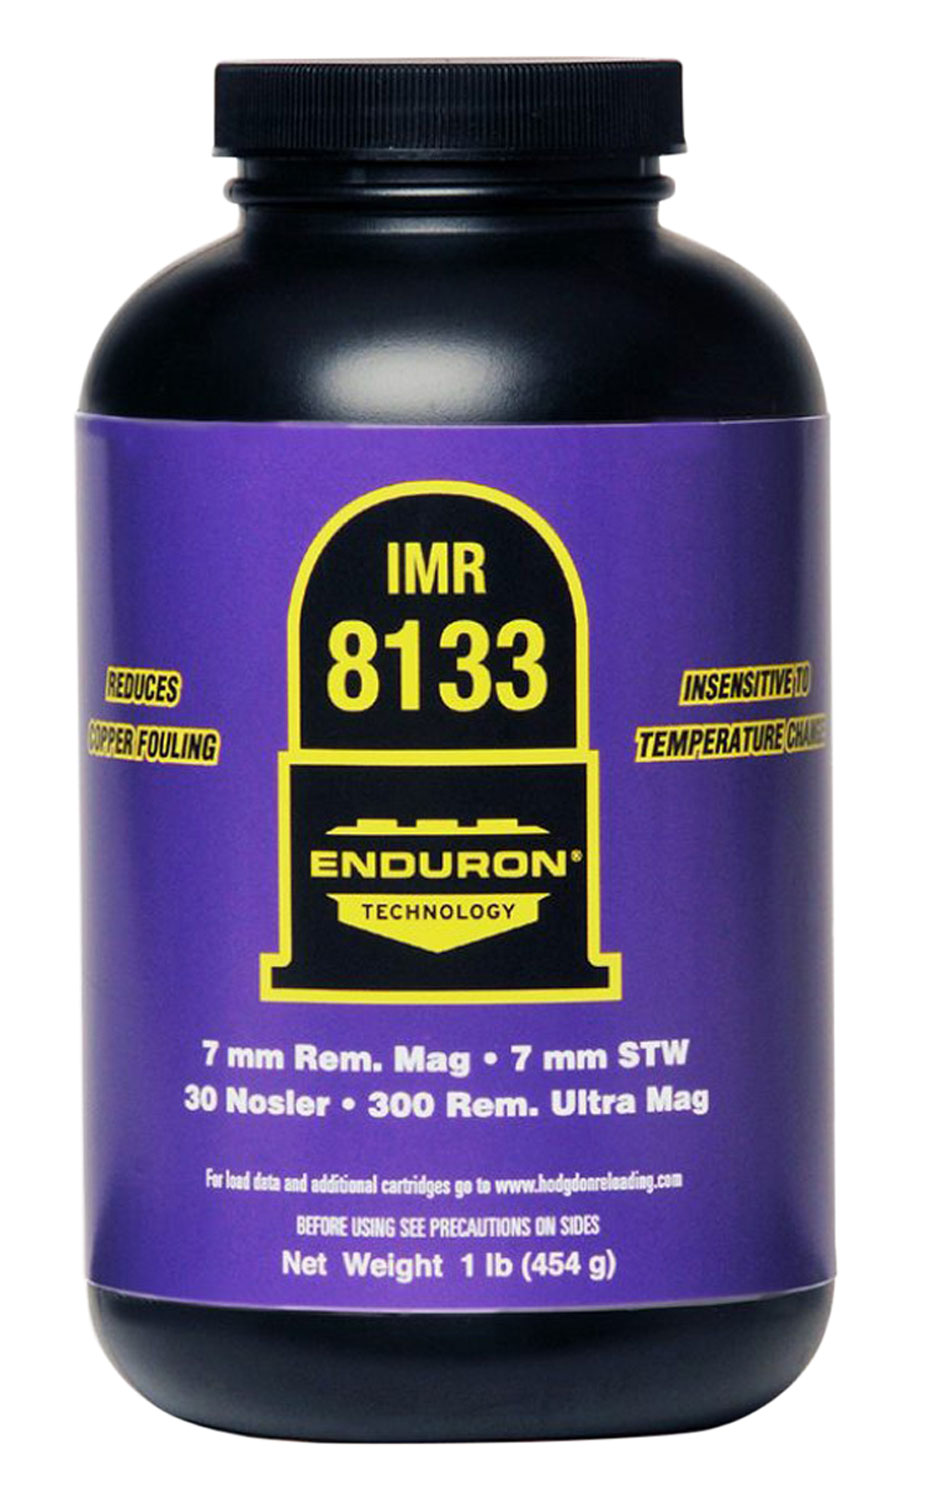 IMR IMR POWDER 8133 1LB. CAN | Frontiersman Sports Inc.